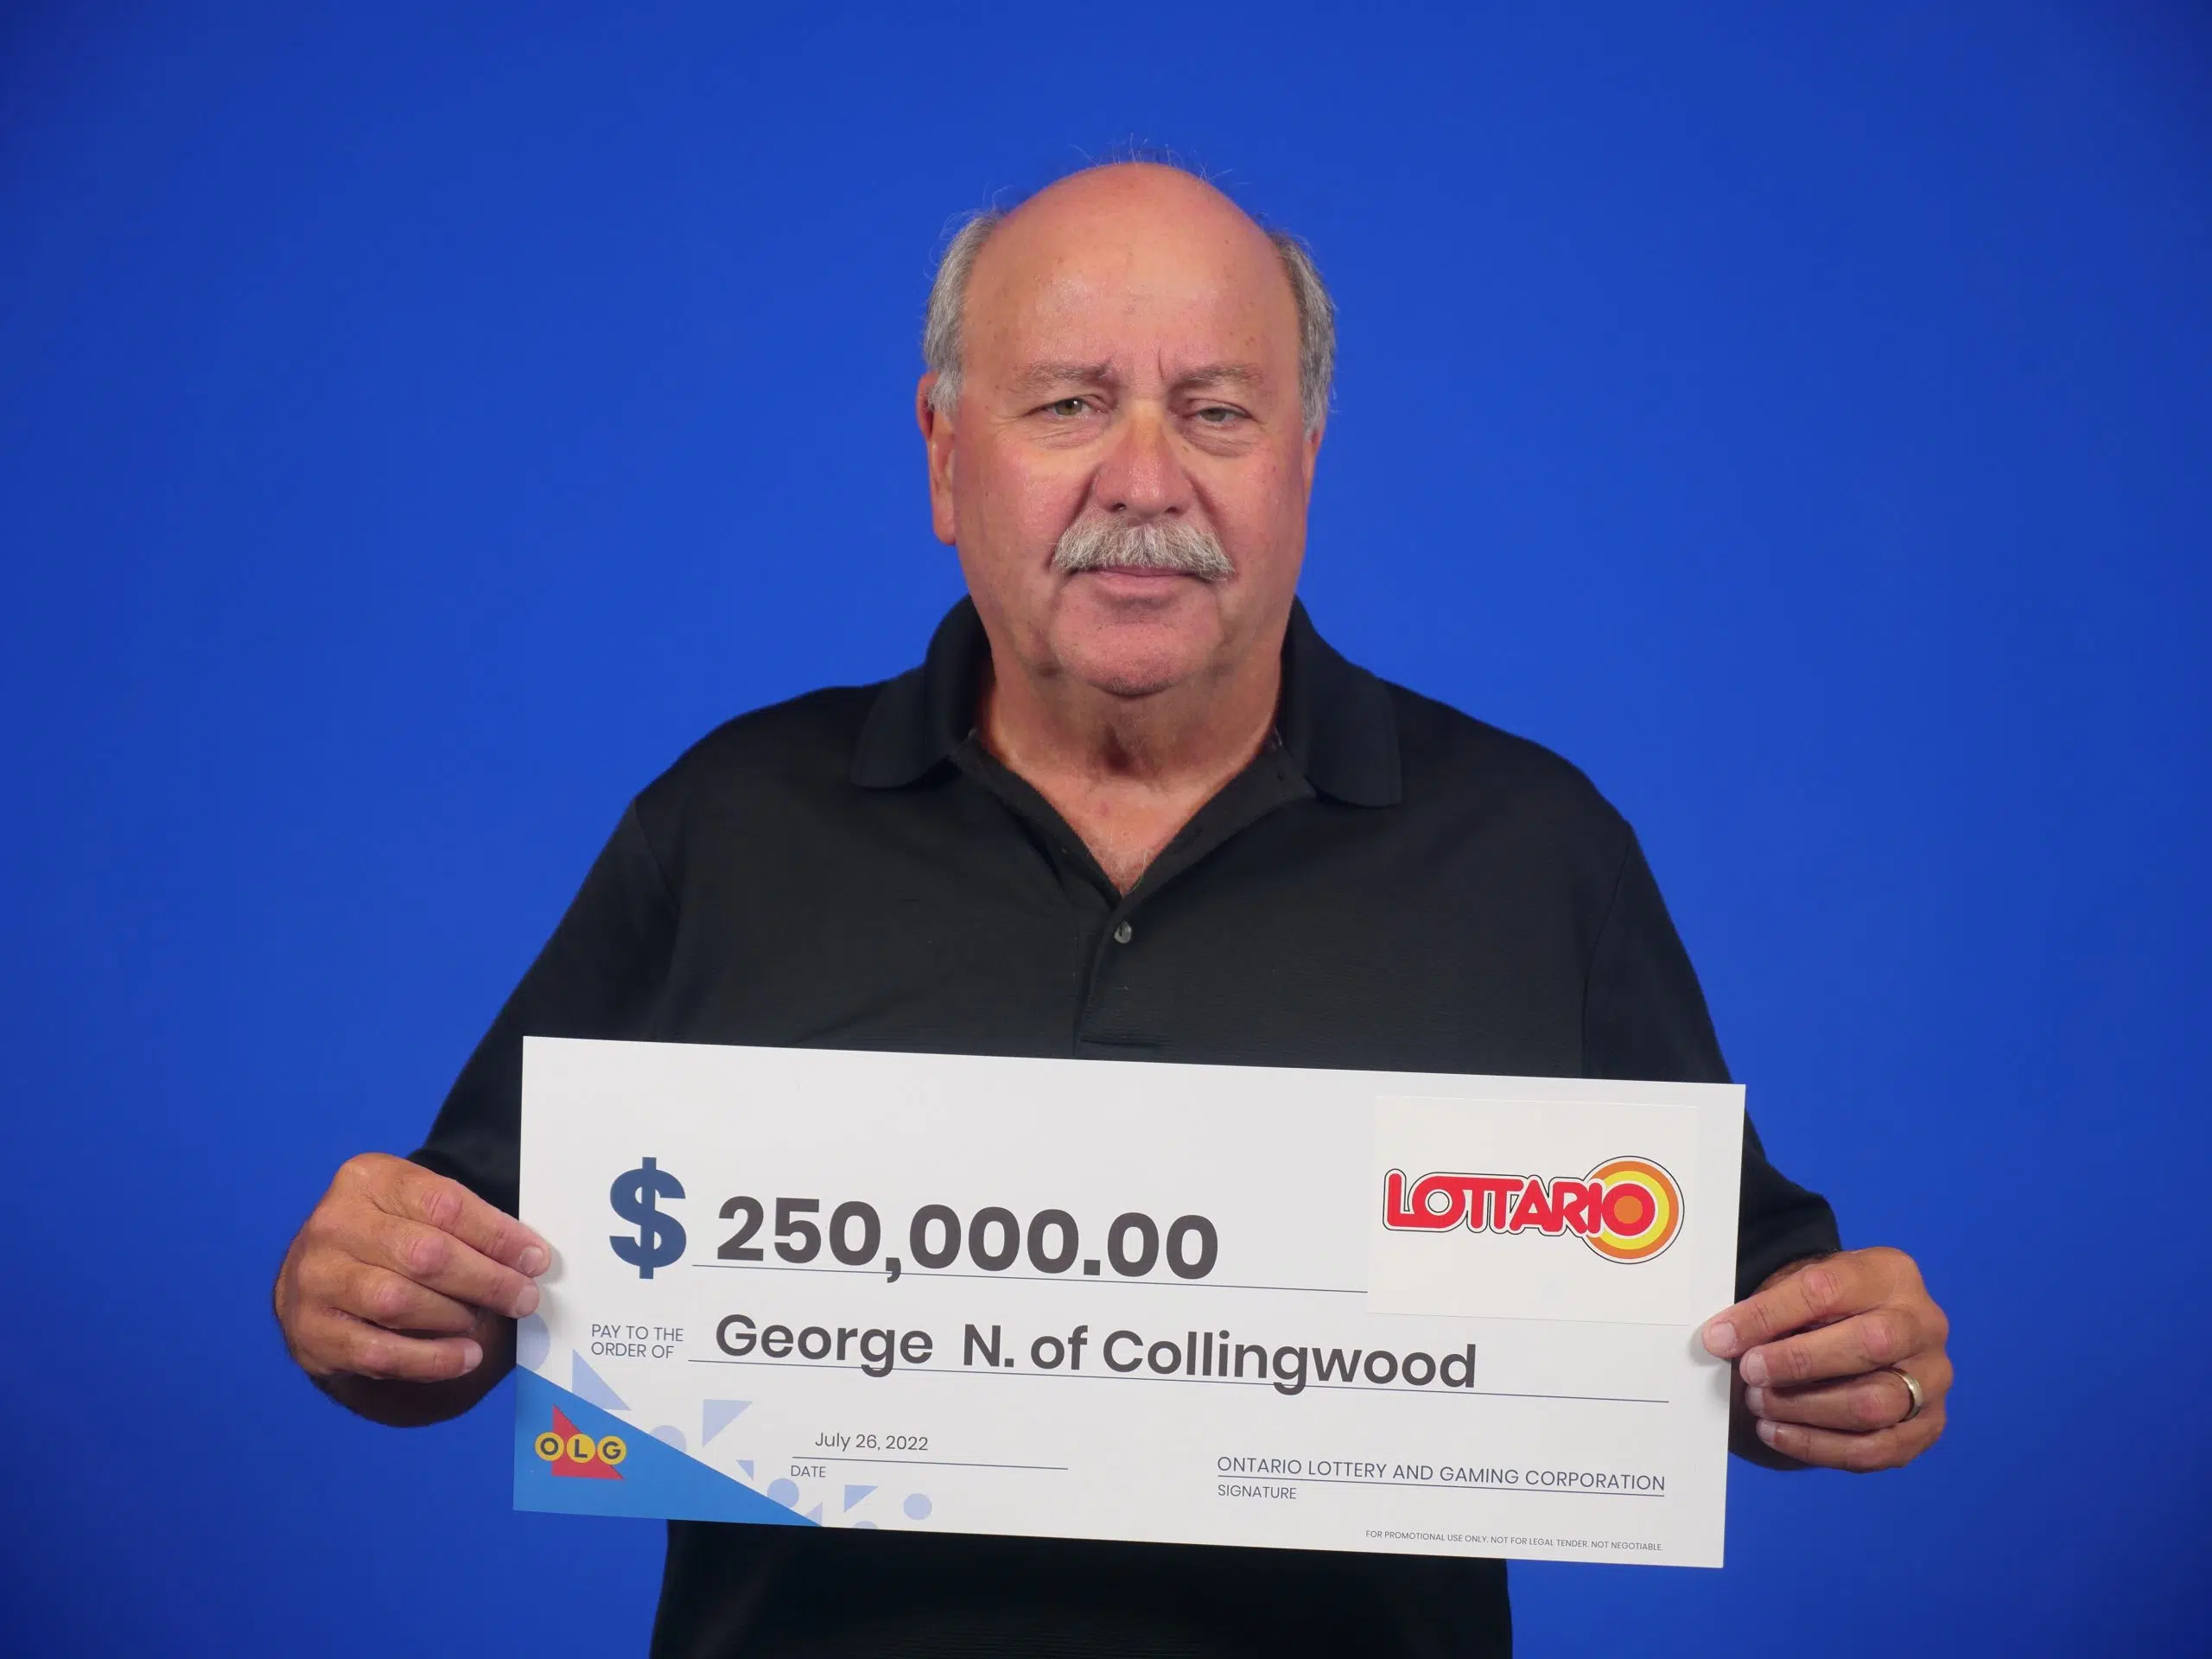 Collingwood Man Wins $250,000 in Lottery | Max 97.7